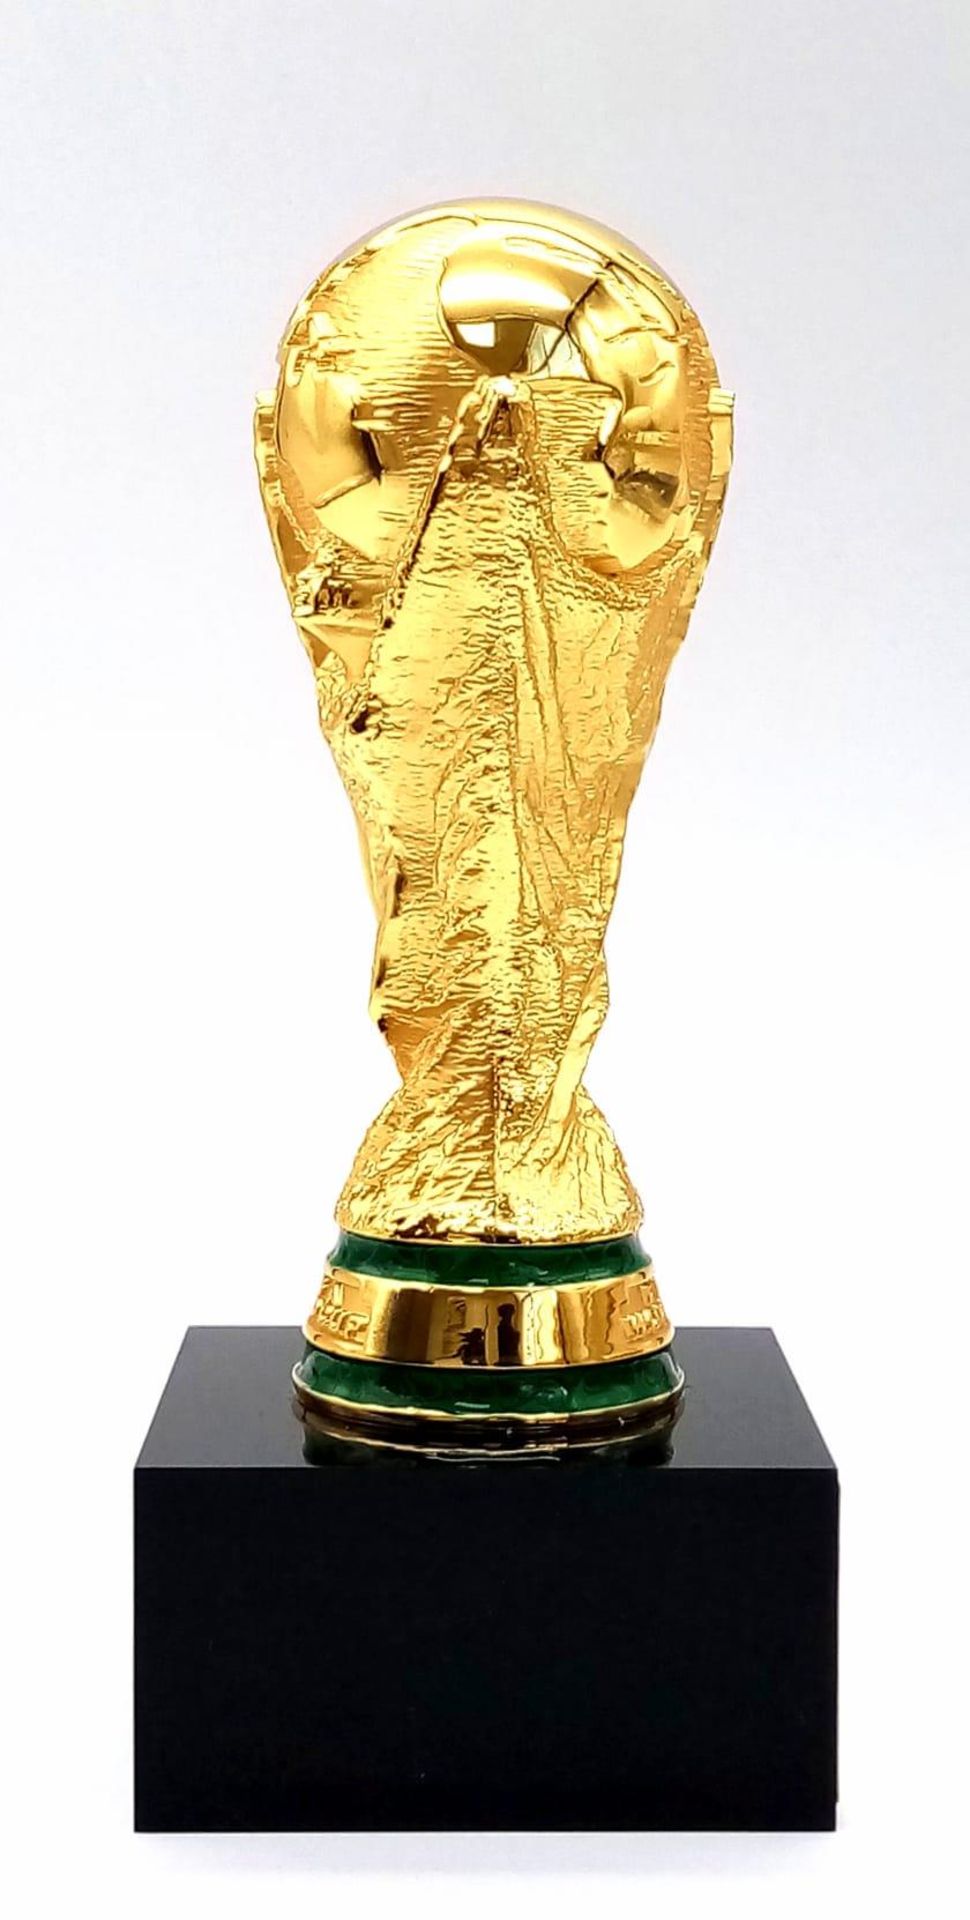 A OFFICIAL FIFA WORLD CUP QATAR 2022 HOSPITALITY TROPHY PRESENTED AT MATCH 61 SEMI FINAL BETWEEN - Image 4 of 8